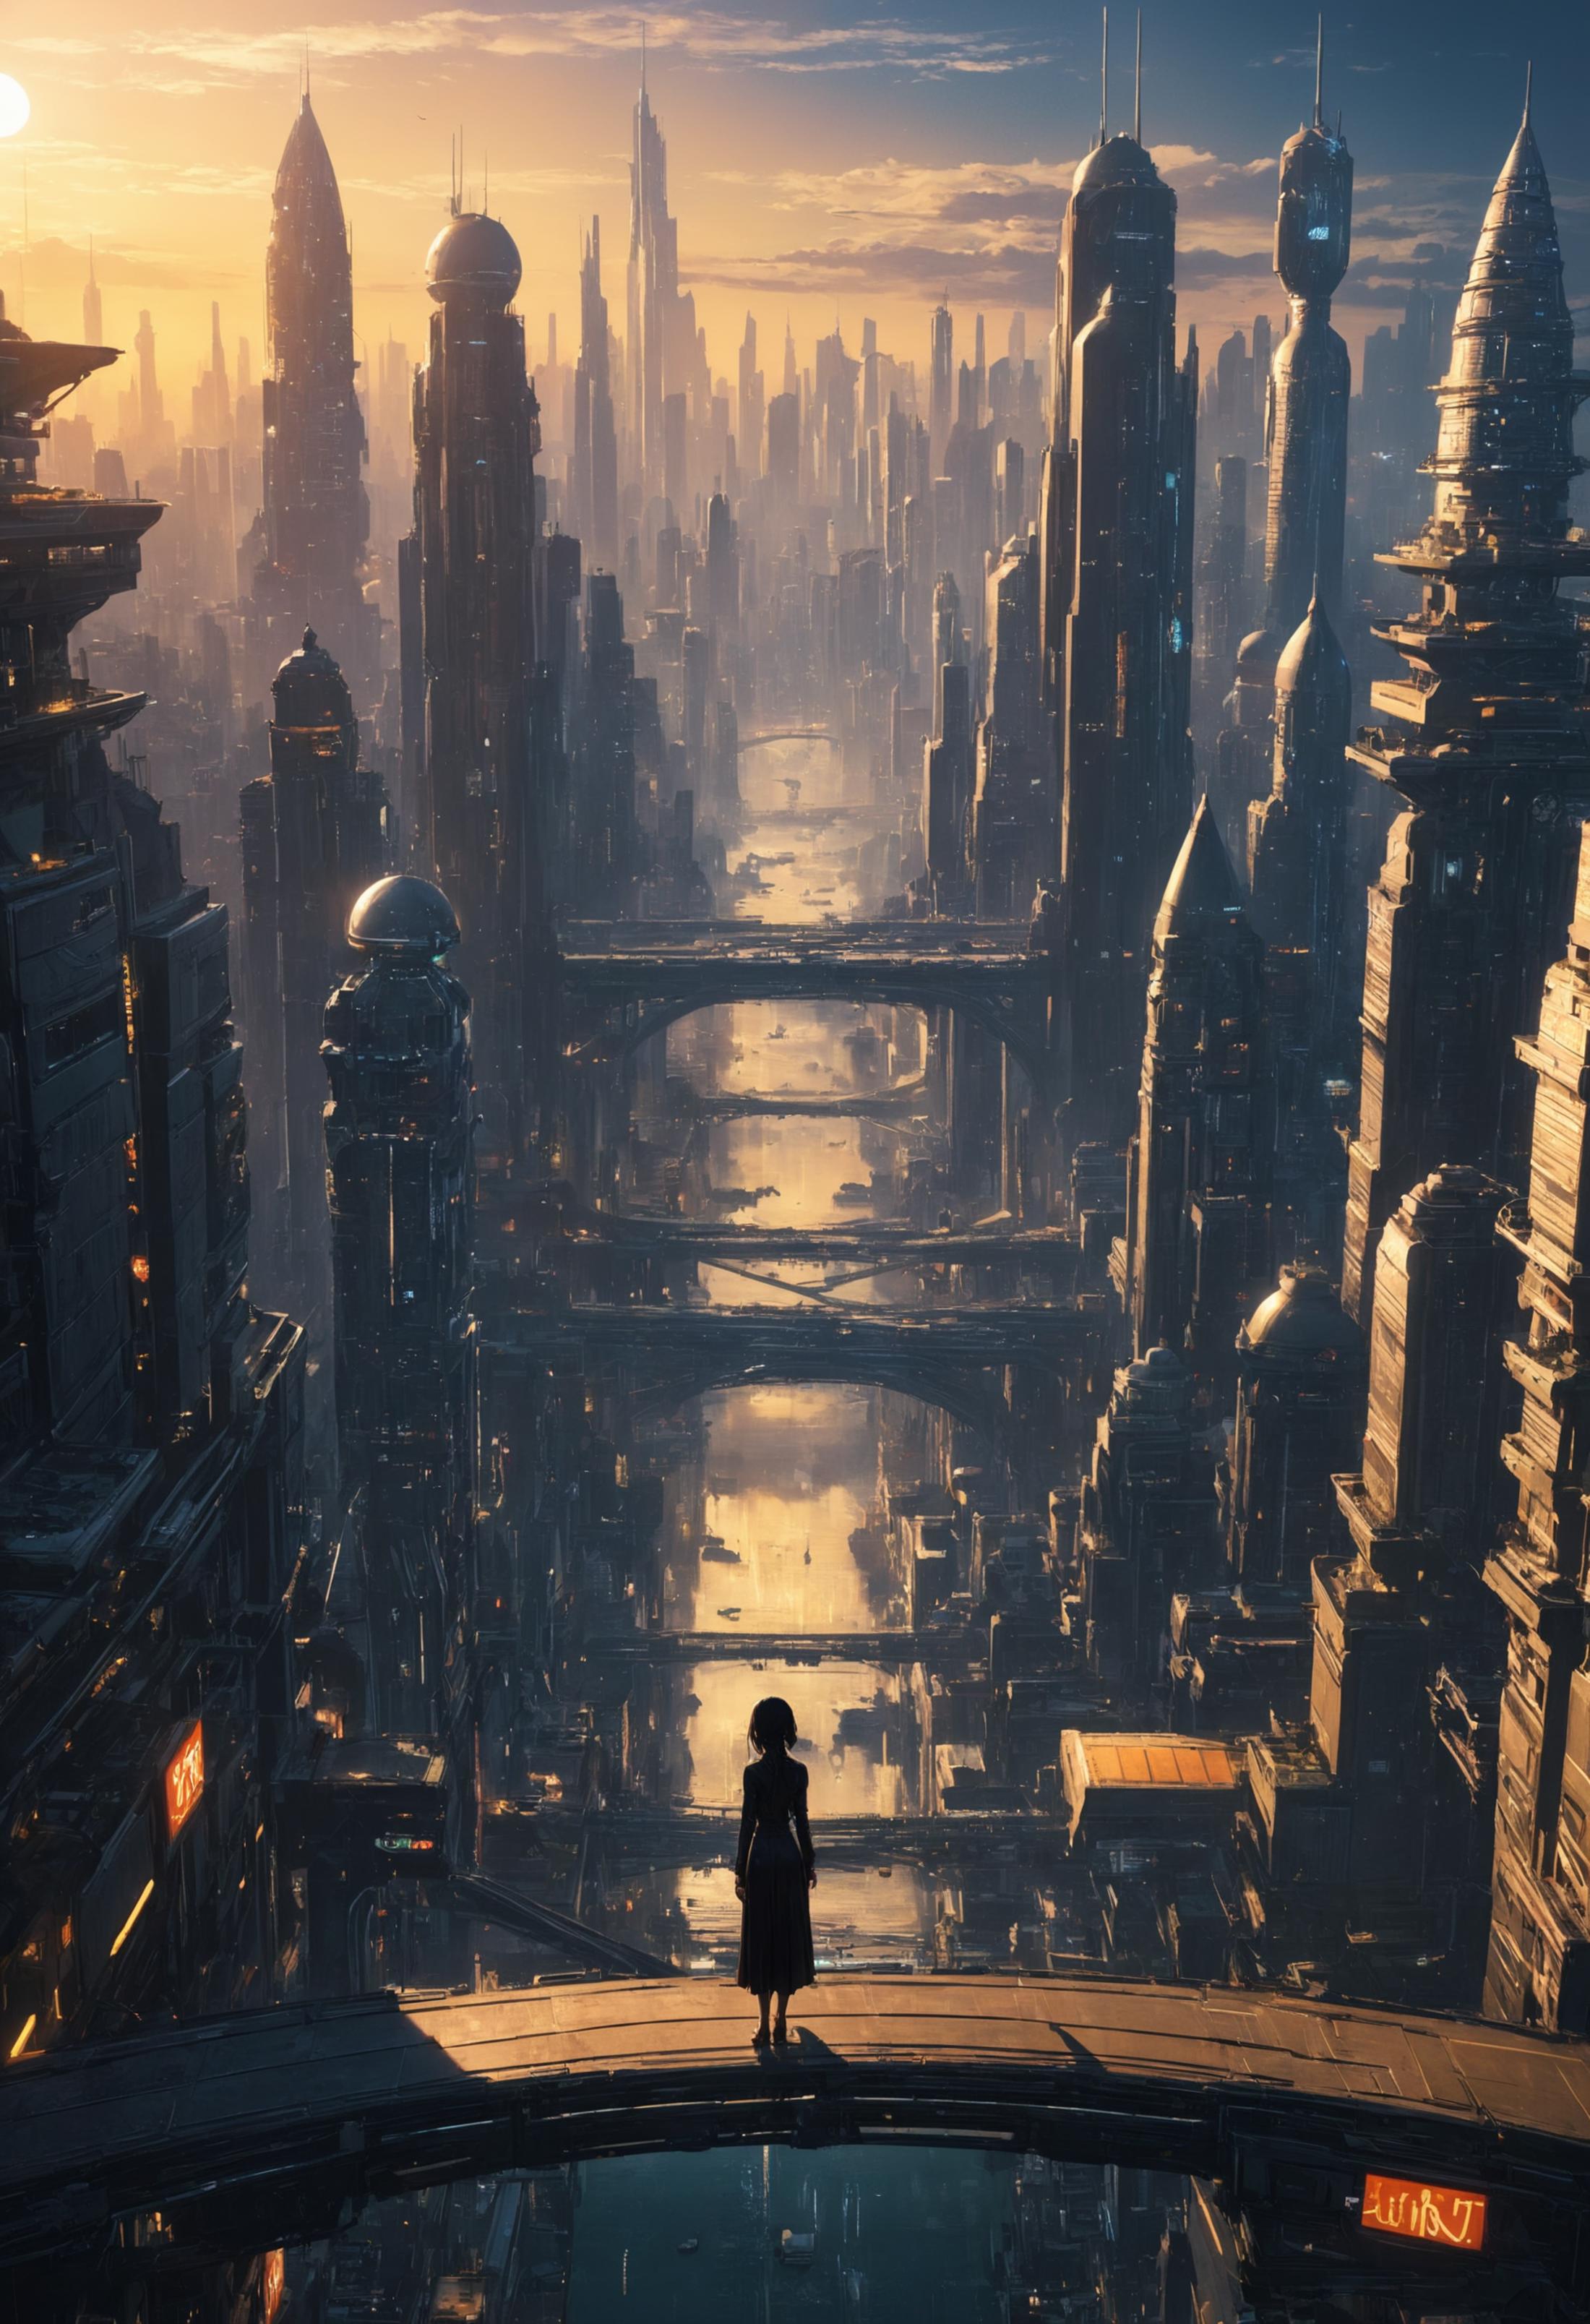 A woman standing in a futuristic city skyline at sunset.